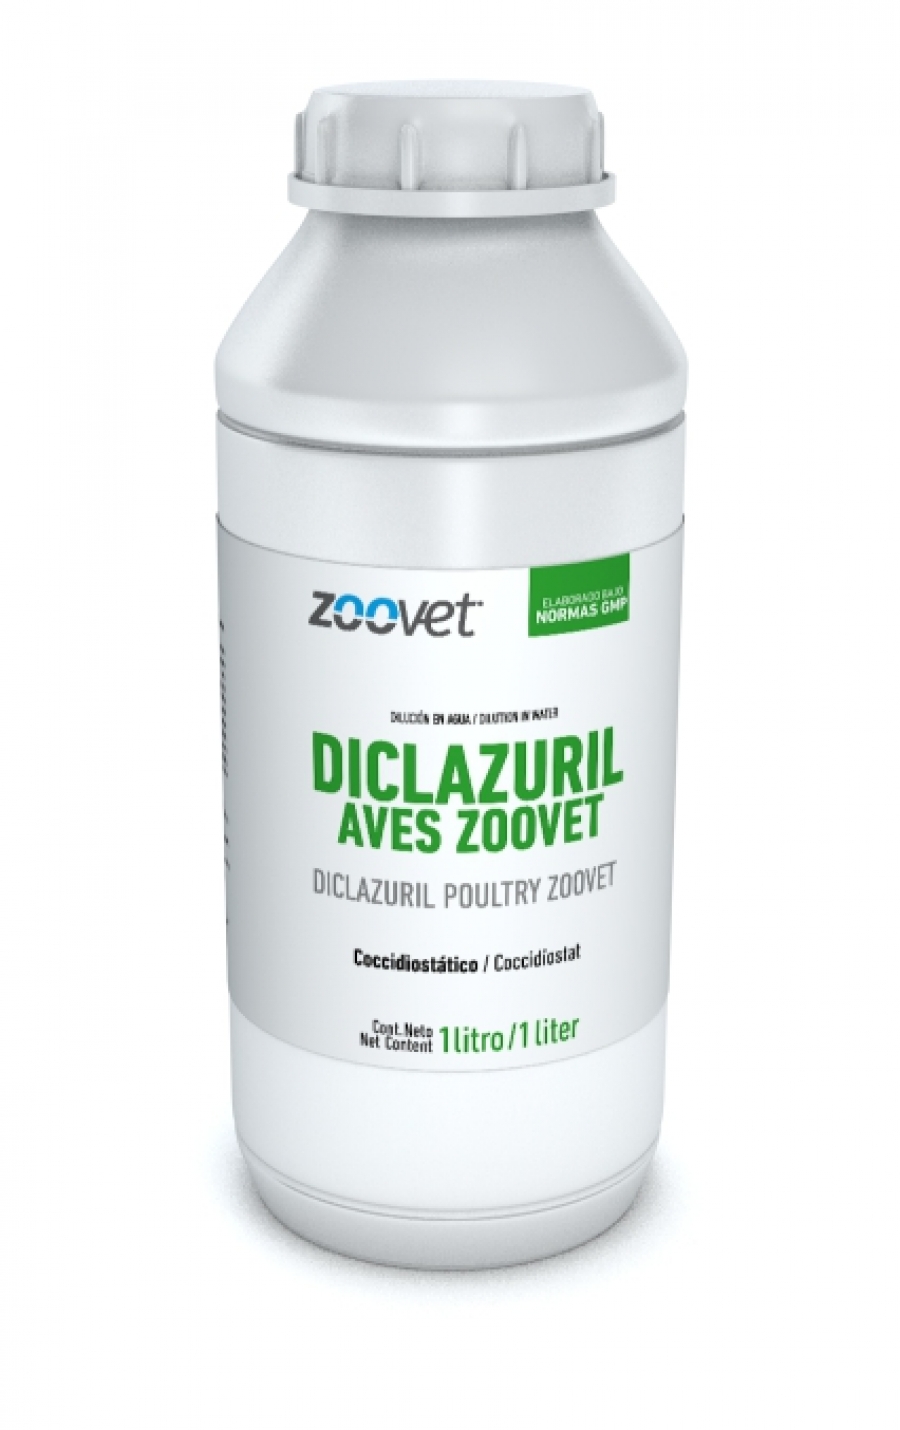 DICLAZURIL POULTRY ZOOVET